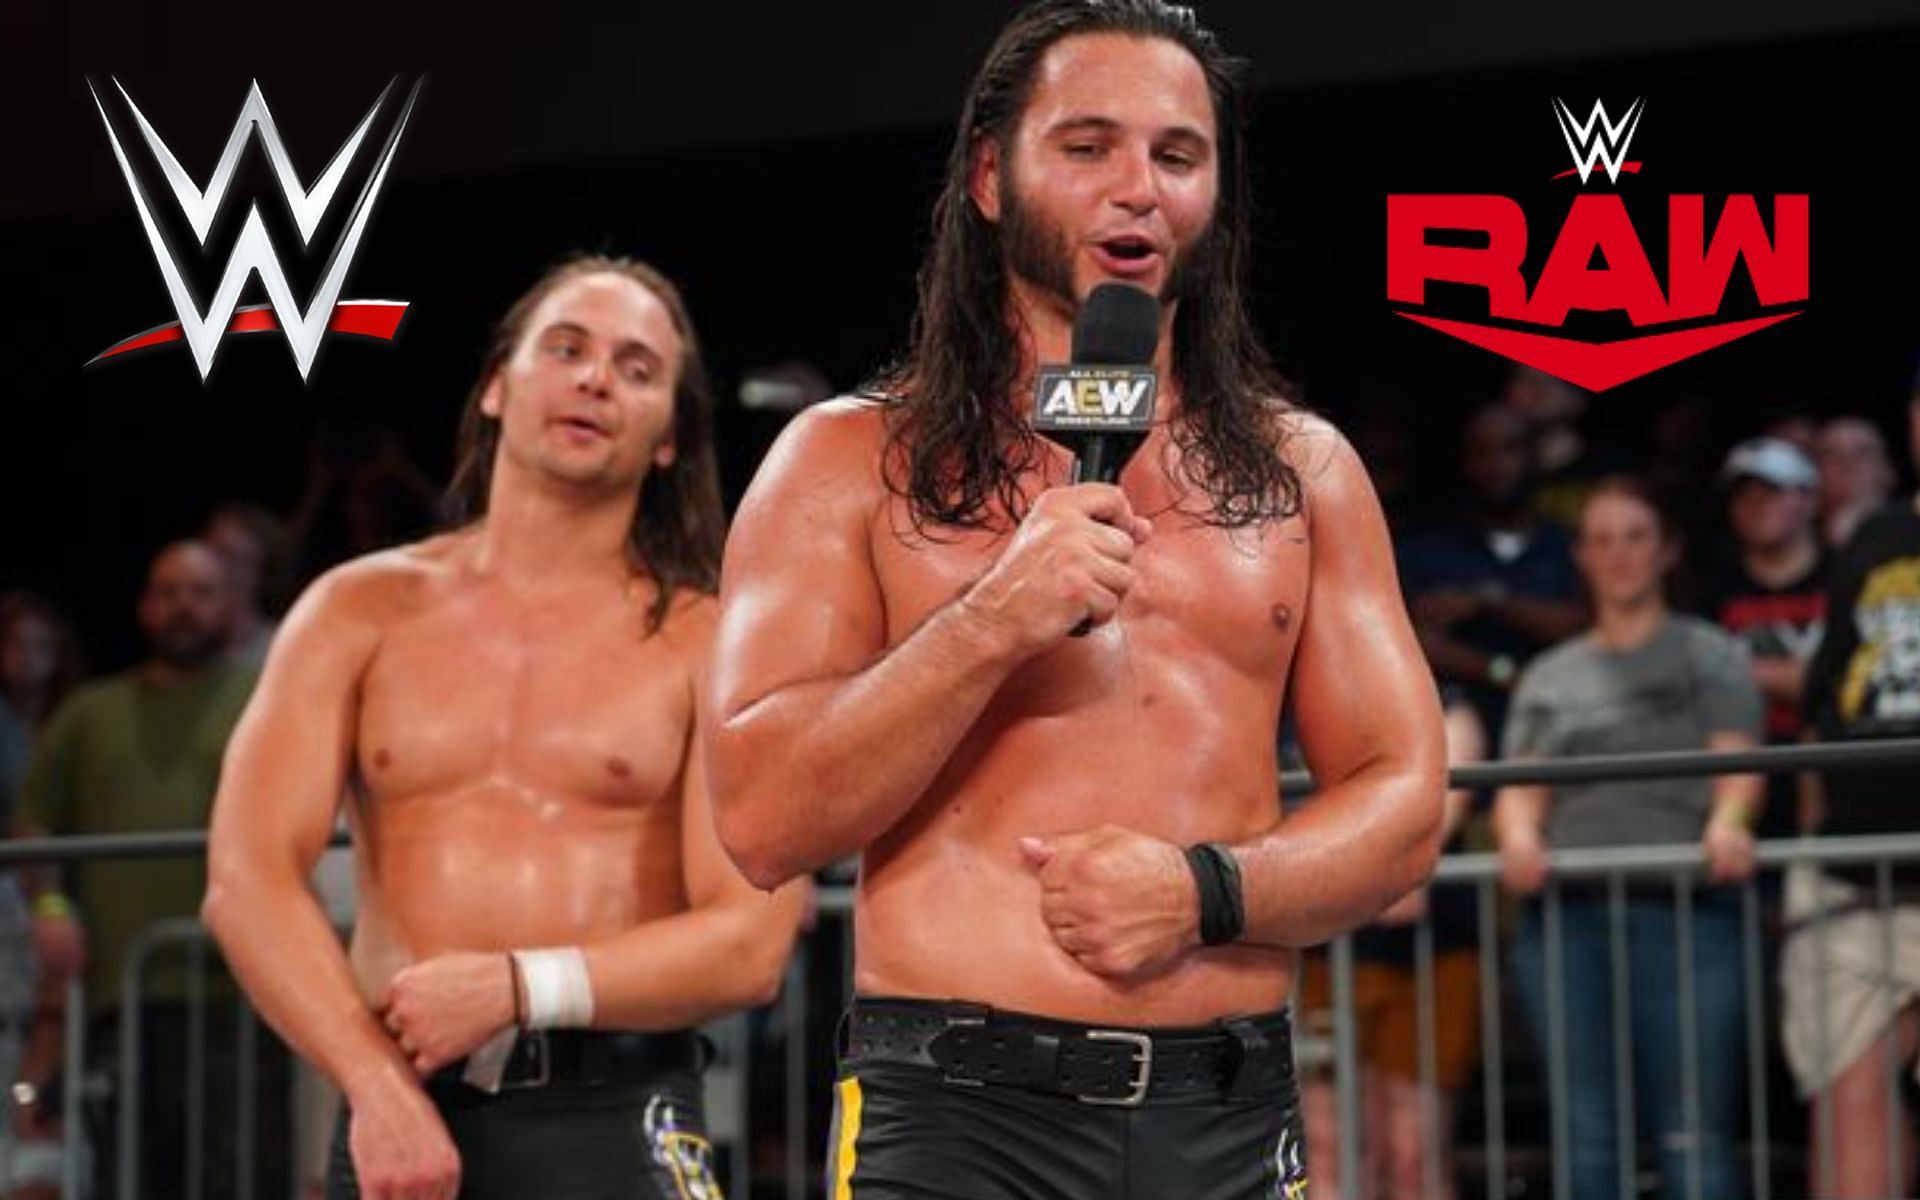 The Young Bucks were mentioned last night on AEW Dynamite.